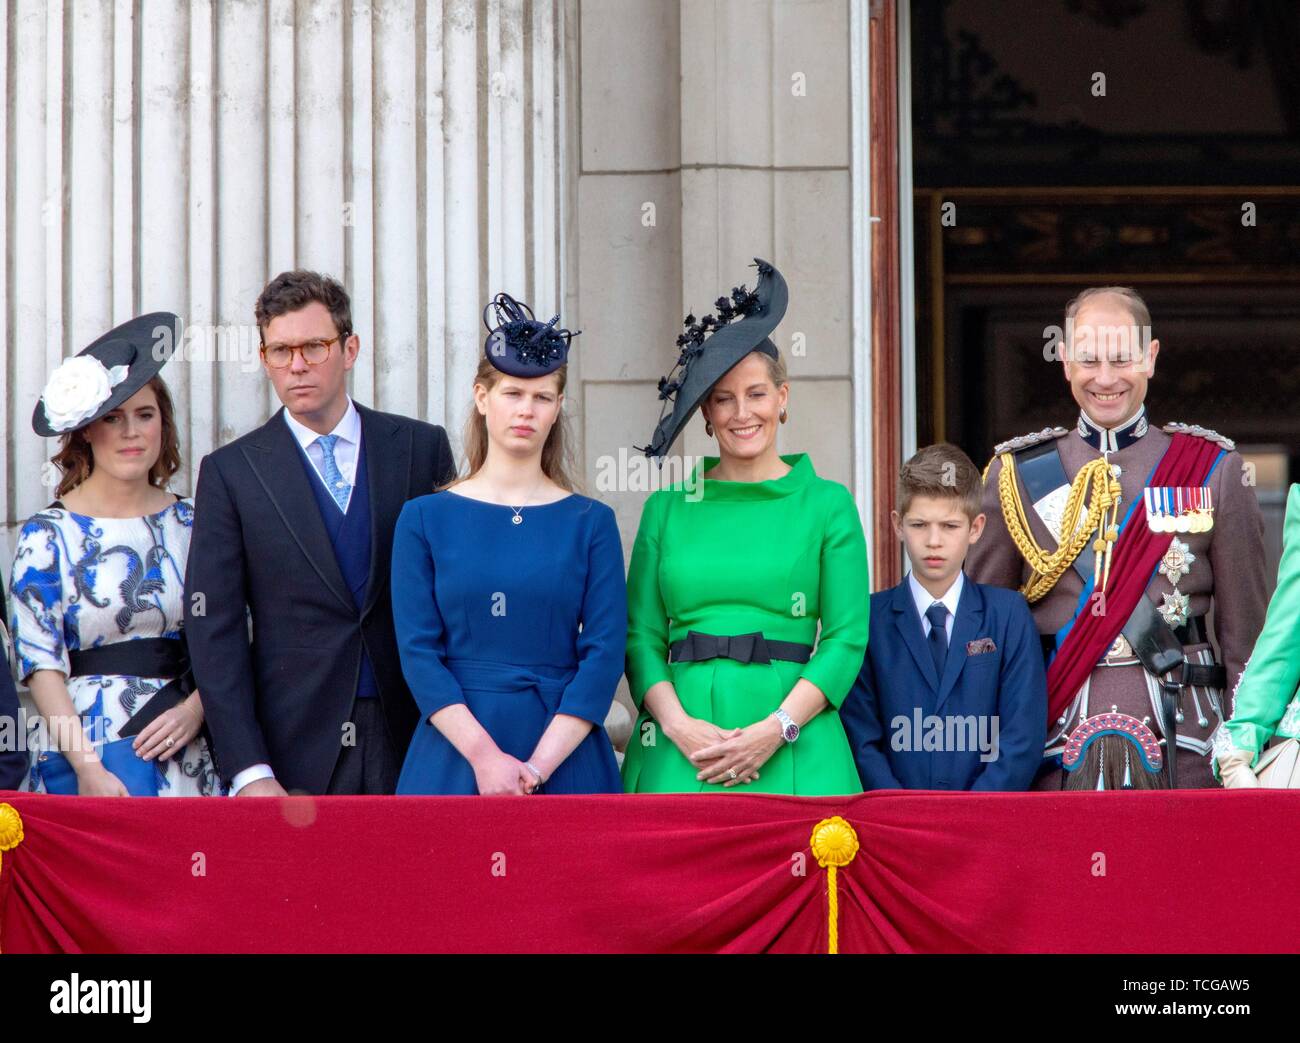 London, UK. 08th June, 2019. Sophie, Countess of Wessex and Prince Edward, Princess Eugenie and Princess Beatrice, Lady Louise Windsor and James, Viscount Severn at the balcony of Buckingham Palace in London, on June 08, 2019, after attending Trooping the Colour at the Horse Guards Parade, the Queens birthday parade Photo : Albert Nieboer/ Netherlands OUT/Point de Vue OUT | Credit: dpa picture alliance/Alamy Live News Stock Photo